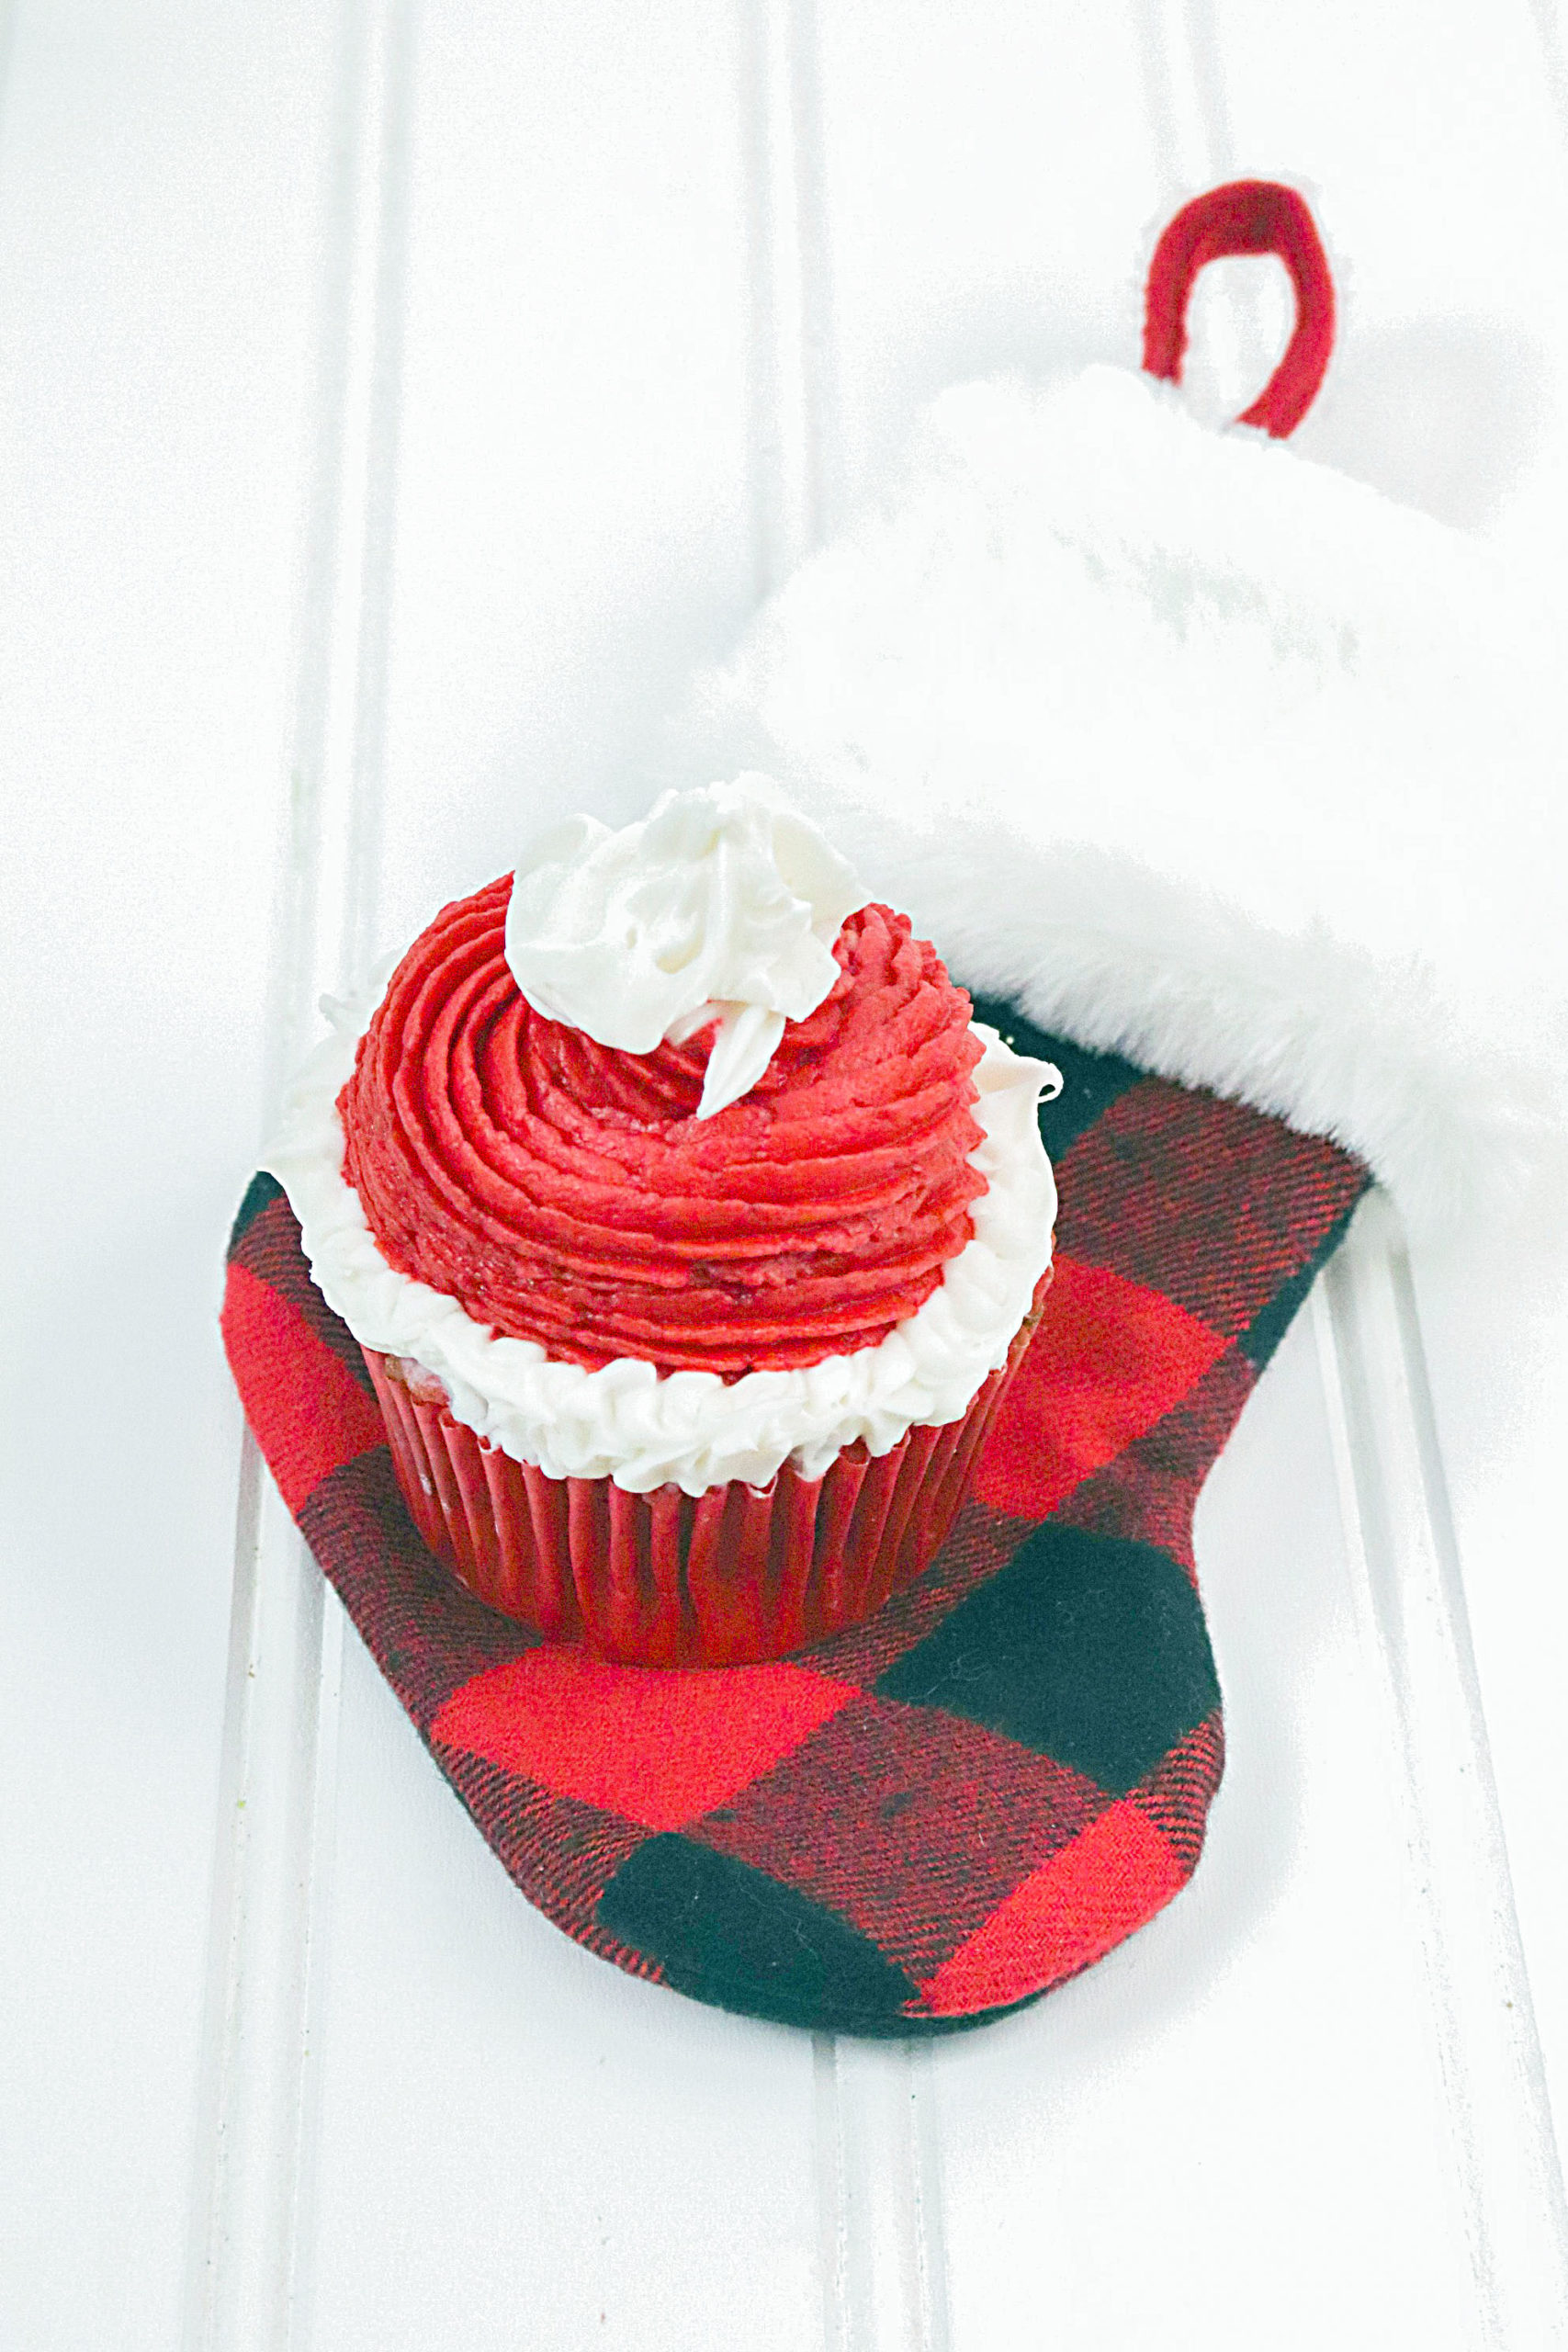 A santa's hat cupcake sitting on a red and white buffalo check stocking.